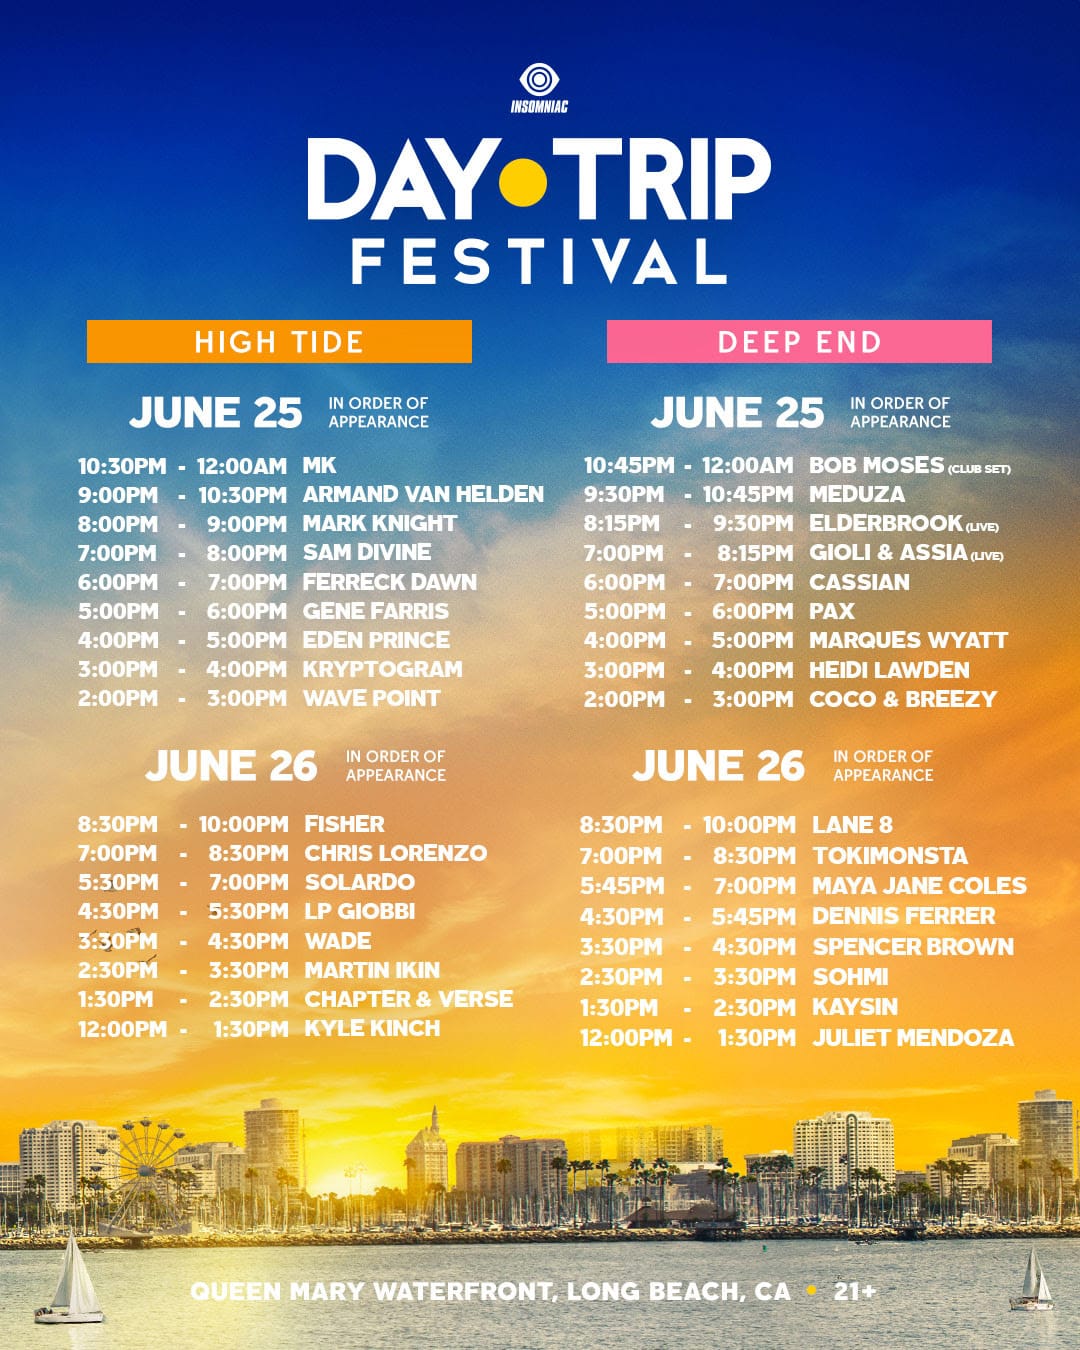 Day Trip Festival 2022 Fixed times and essential information